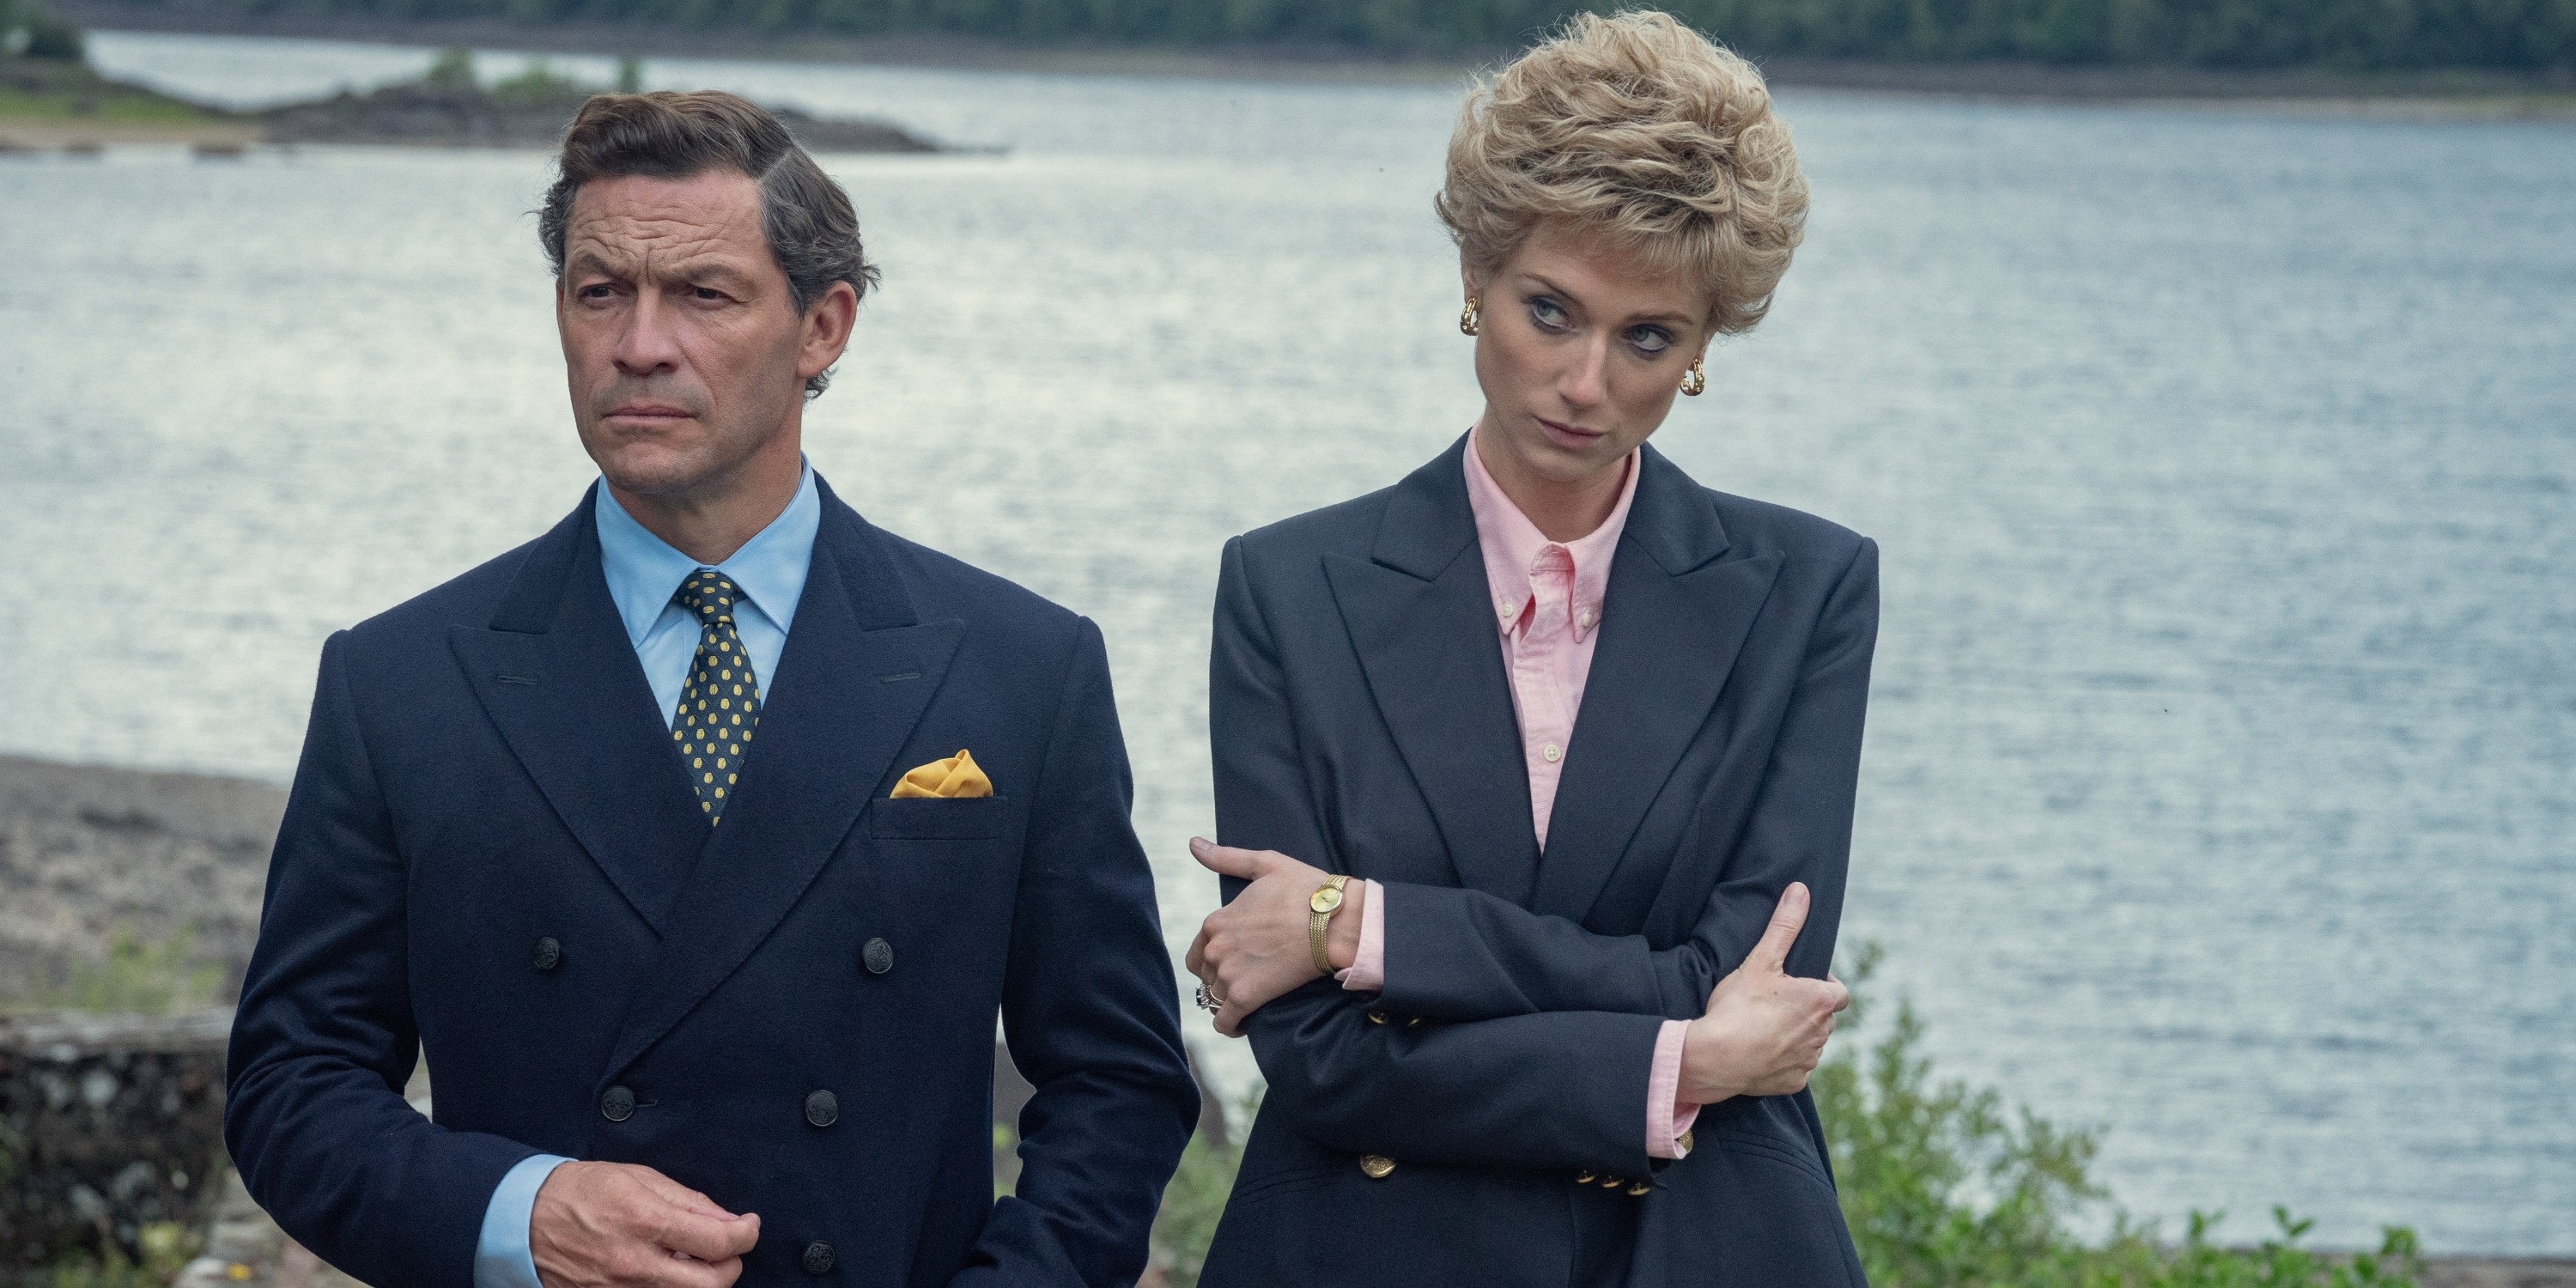 Dominic and Elizabeth Debicki stand next to each other by the ocean during their portrayals as Prince Charles and Princess Diana